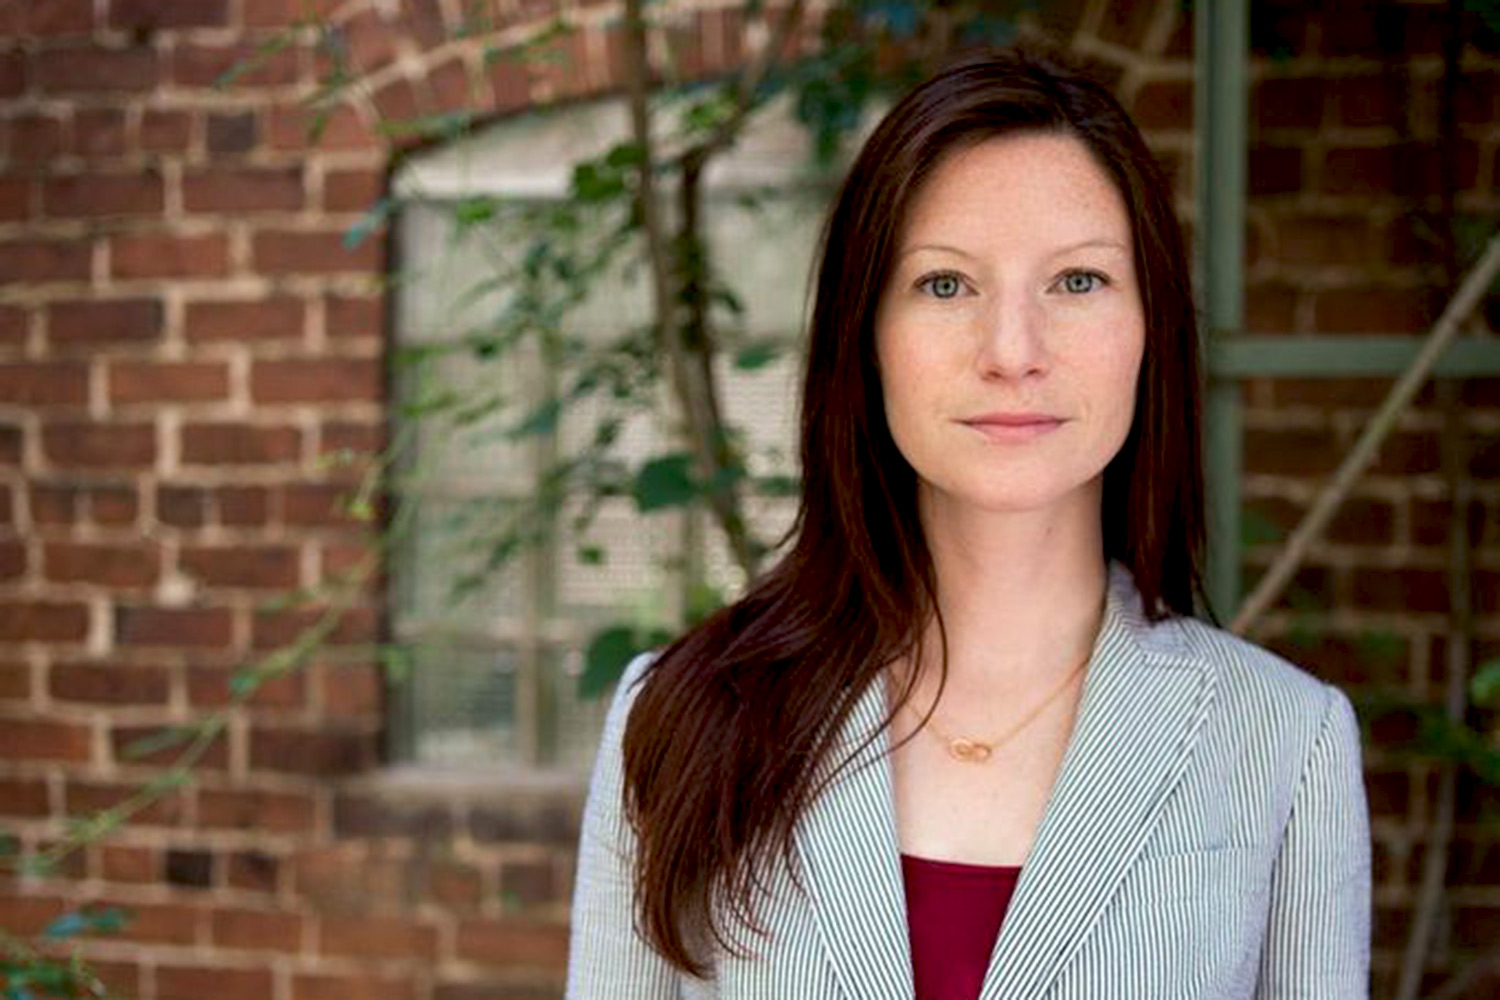 Christine Mahoney is an associate professor of public policy and politics at the Batten School and director of Social Entrepreneurship at UVA.